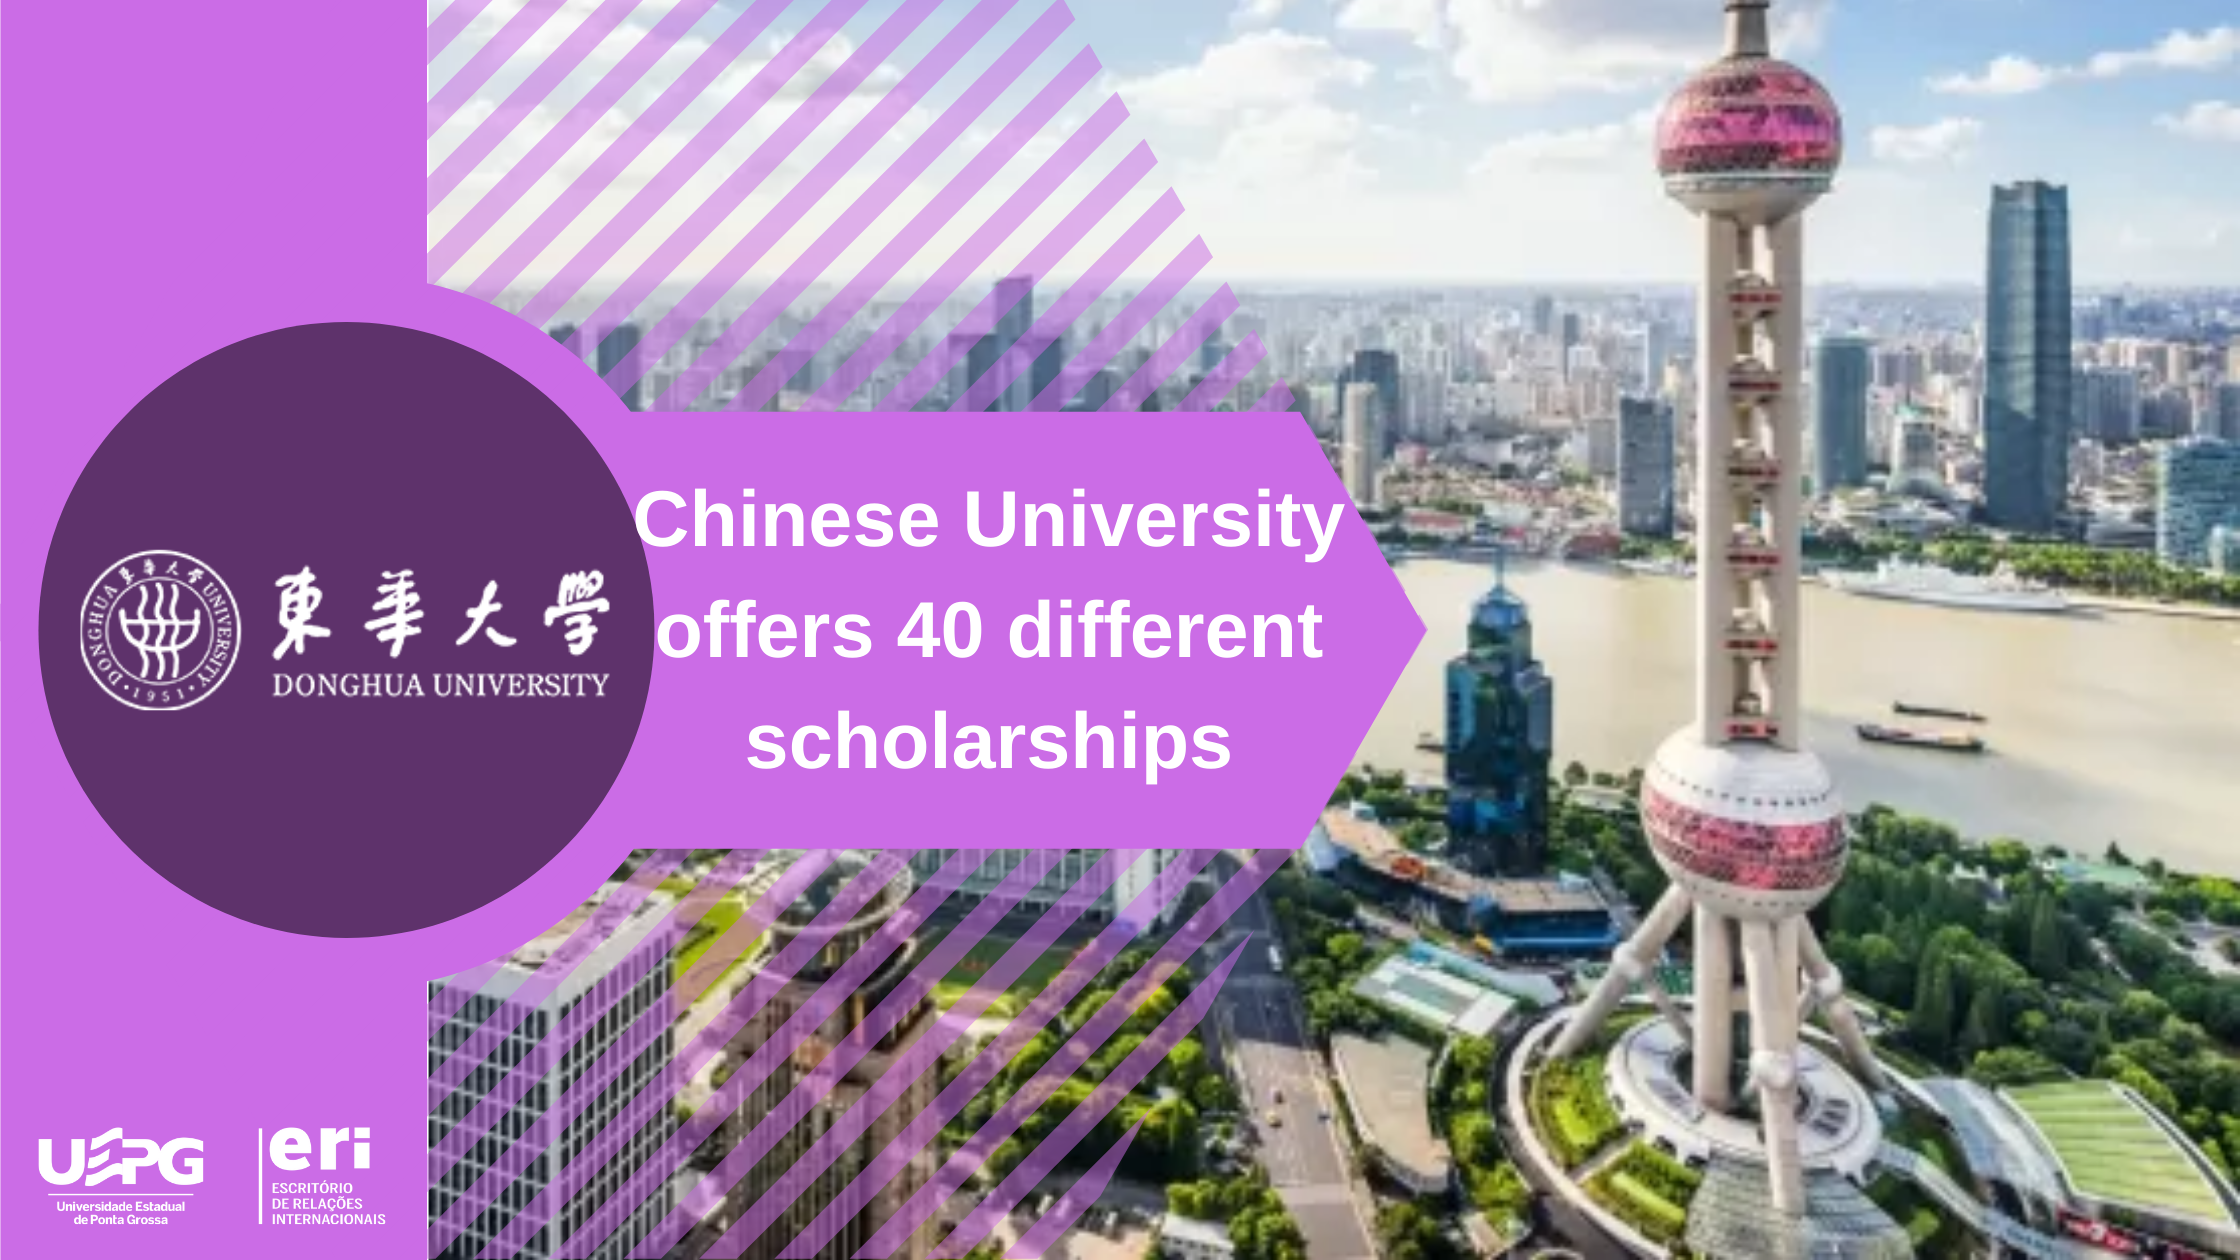 Chinese University offers 40 scholarships